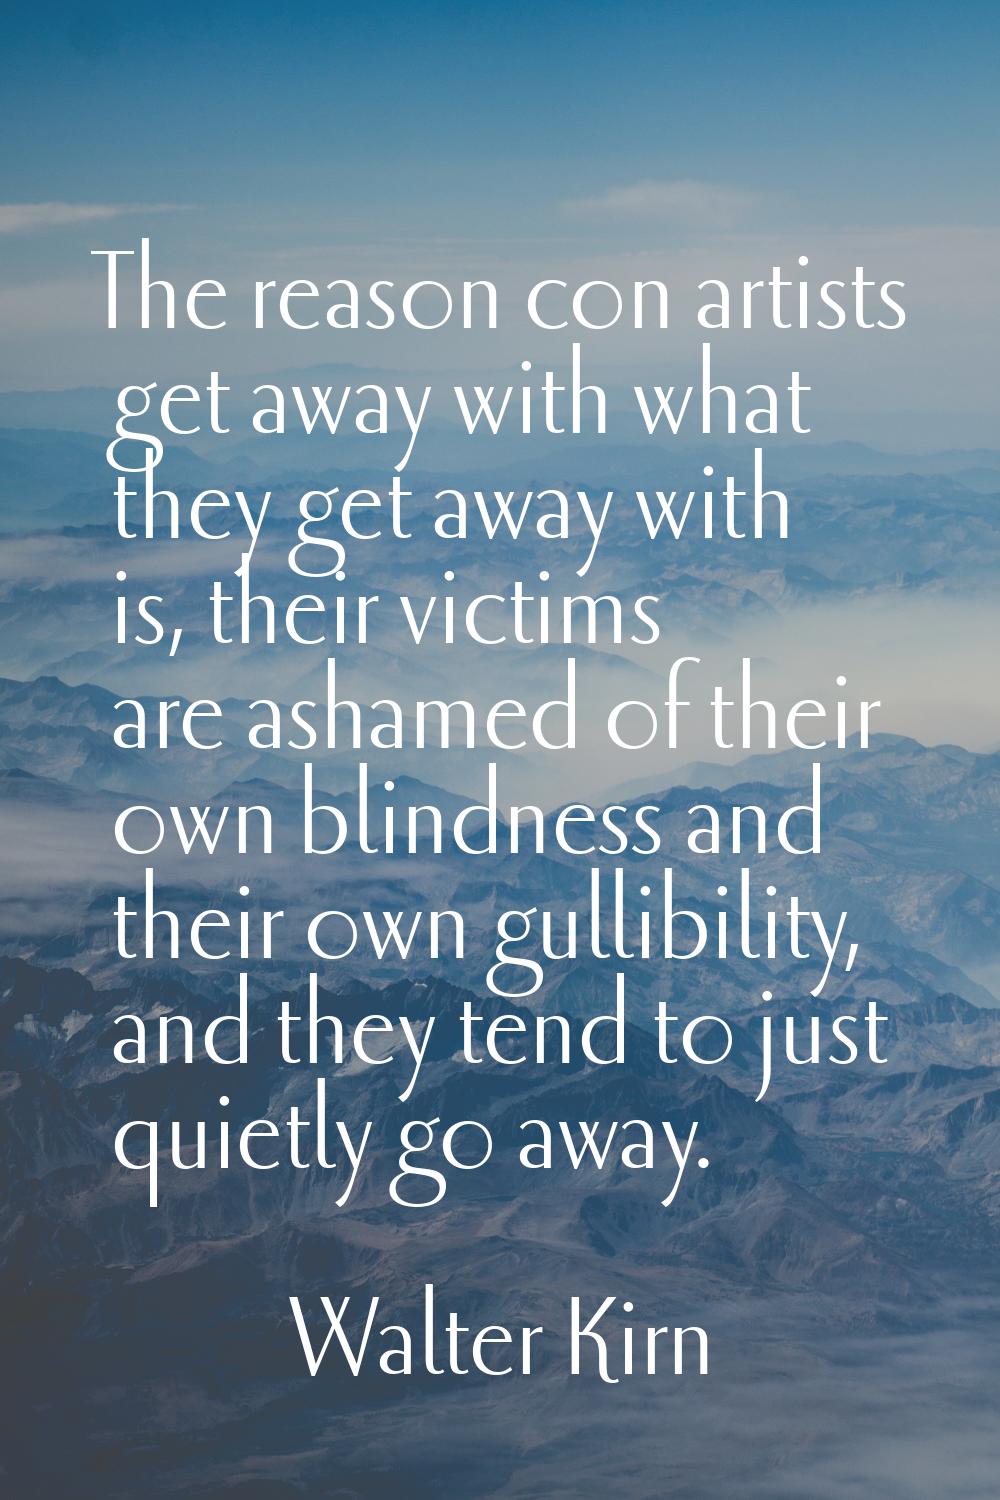 The reason con artists get away with what they get away with is, their victims are ashamed of their